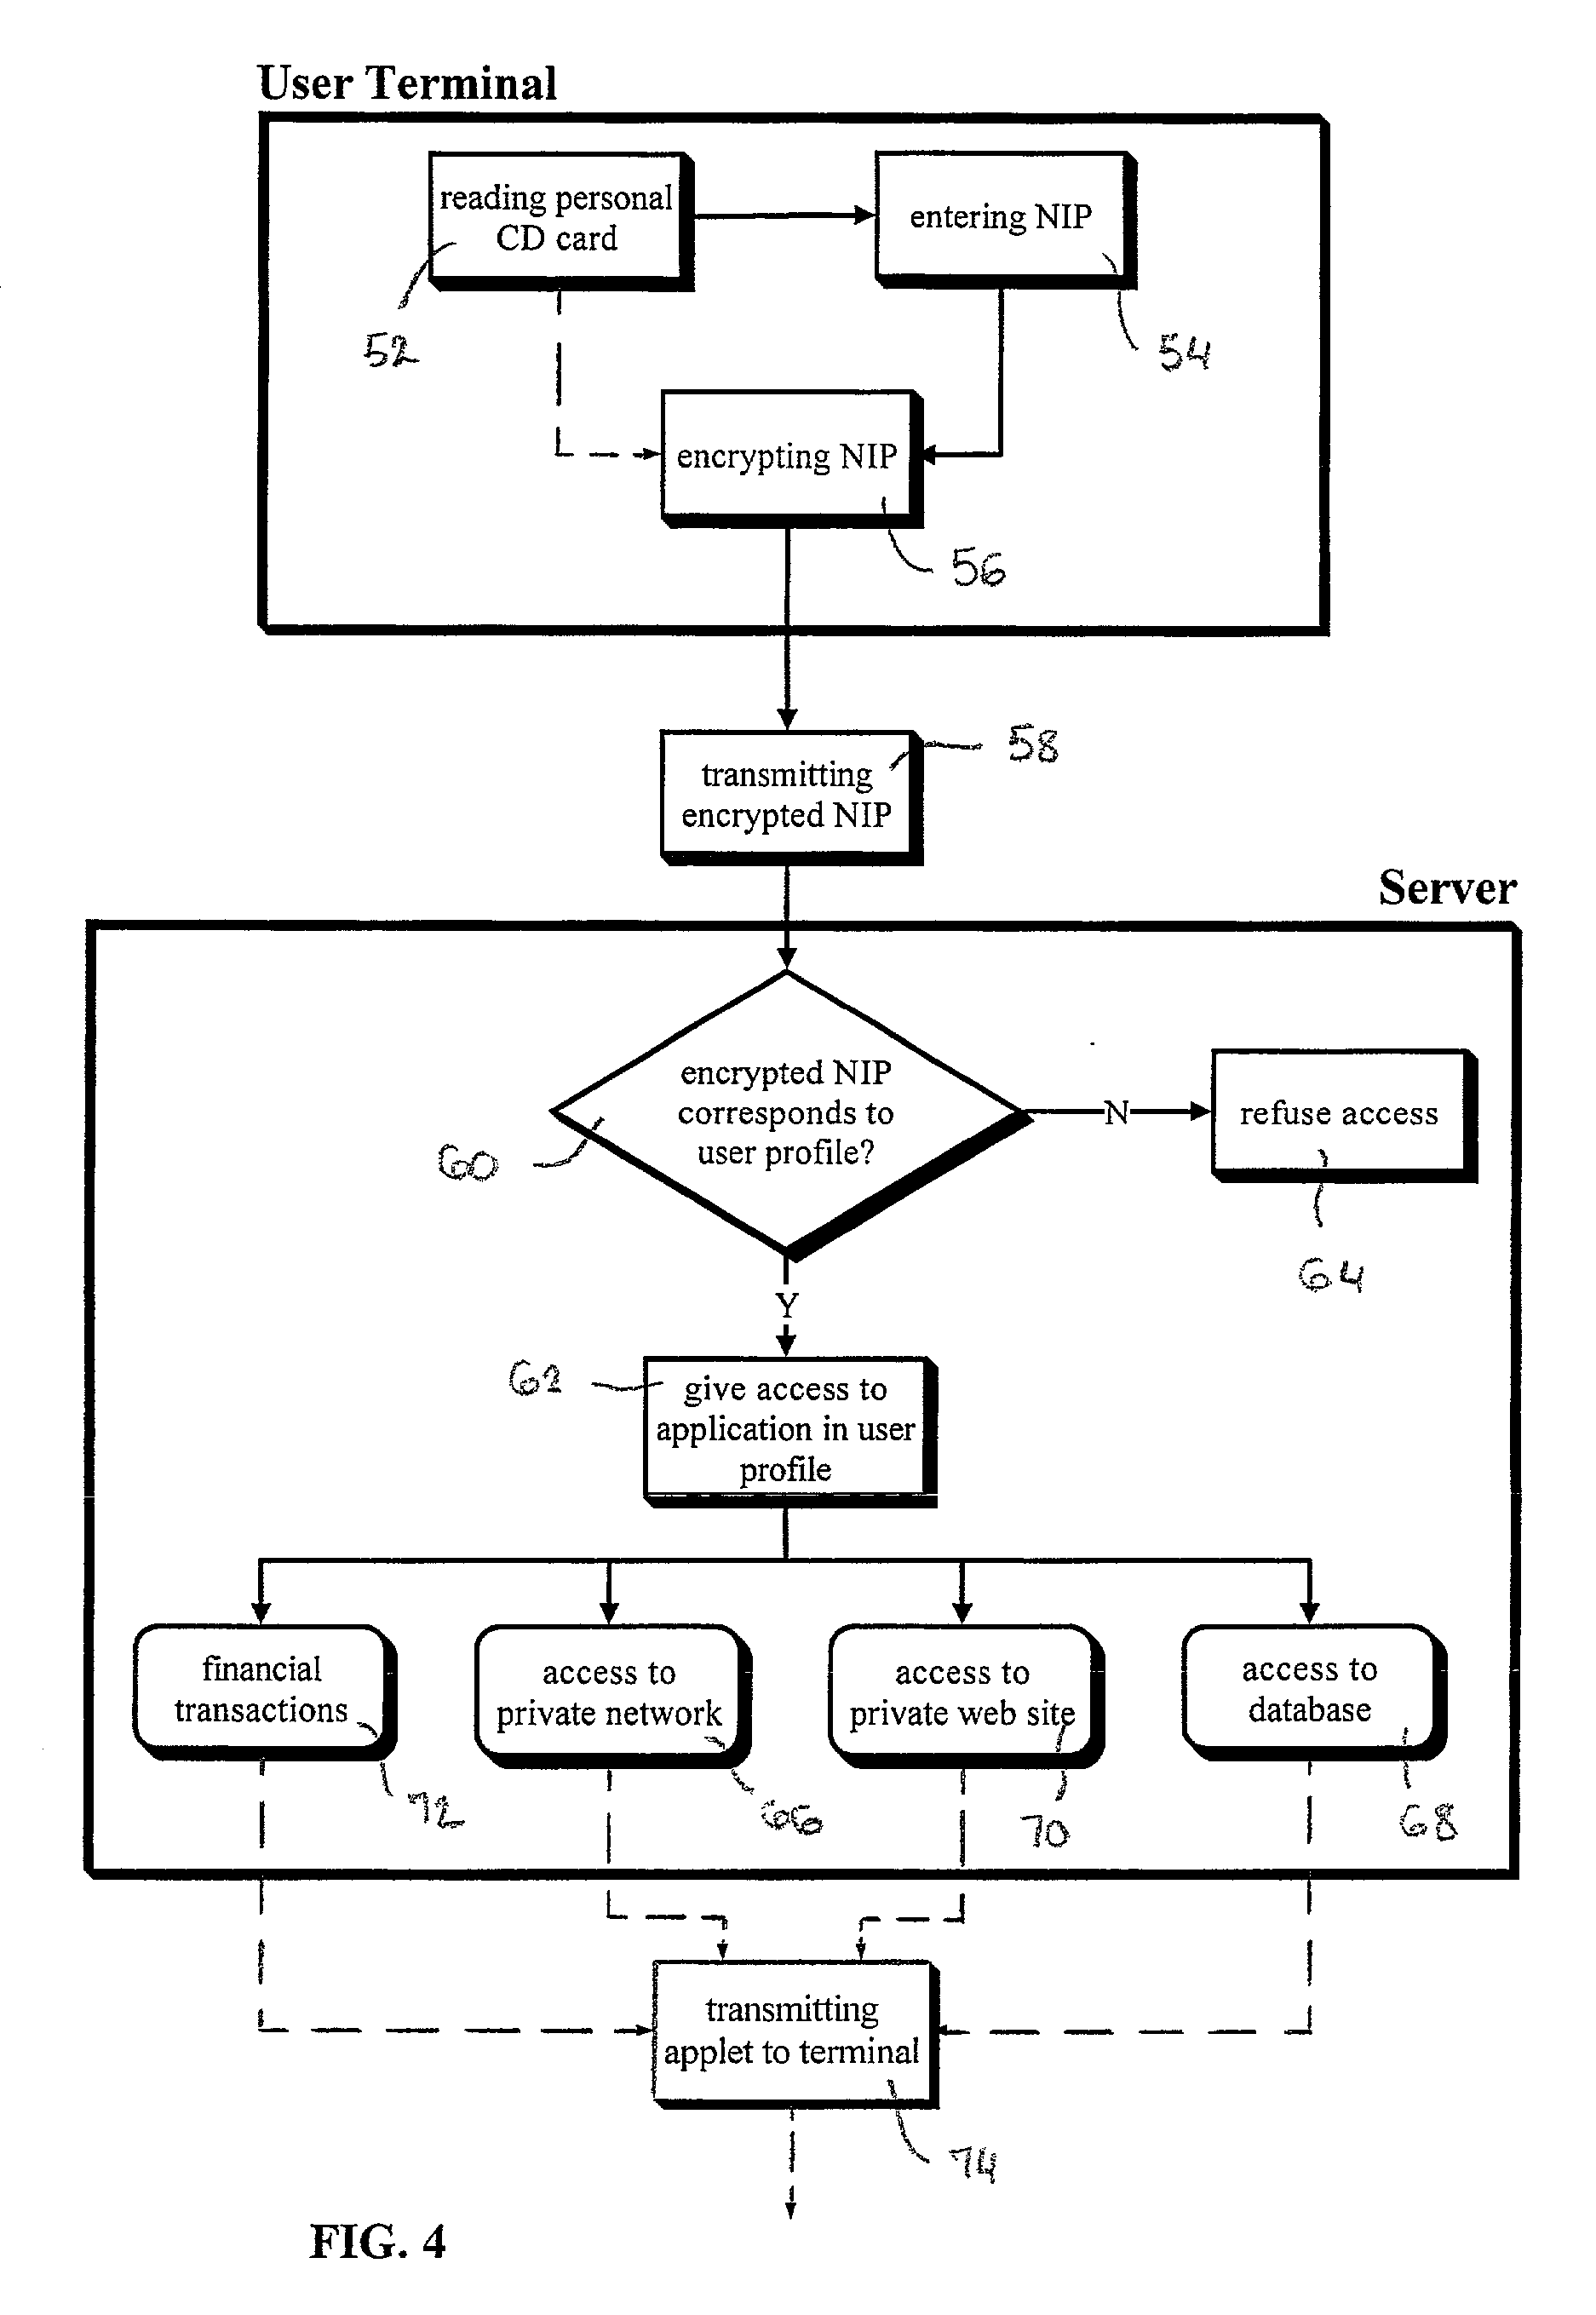 System and method for providing services to a remote user through a network